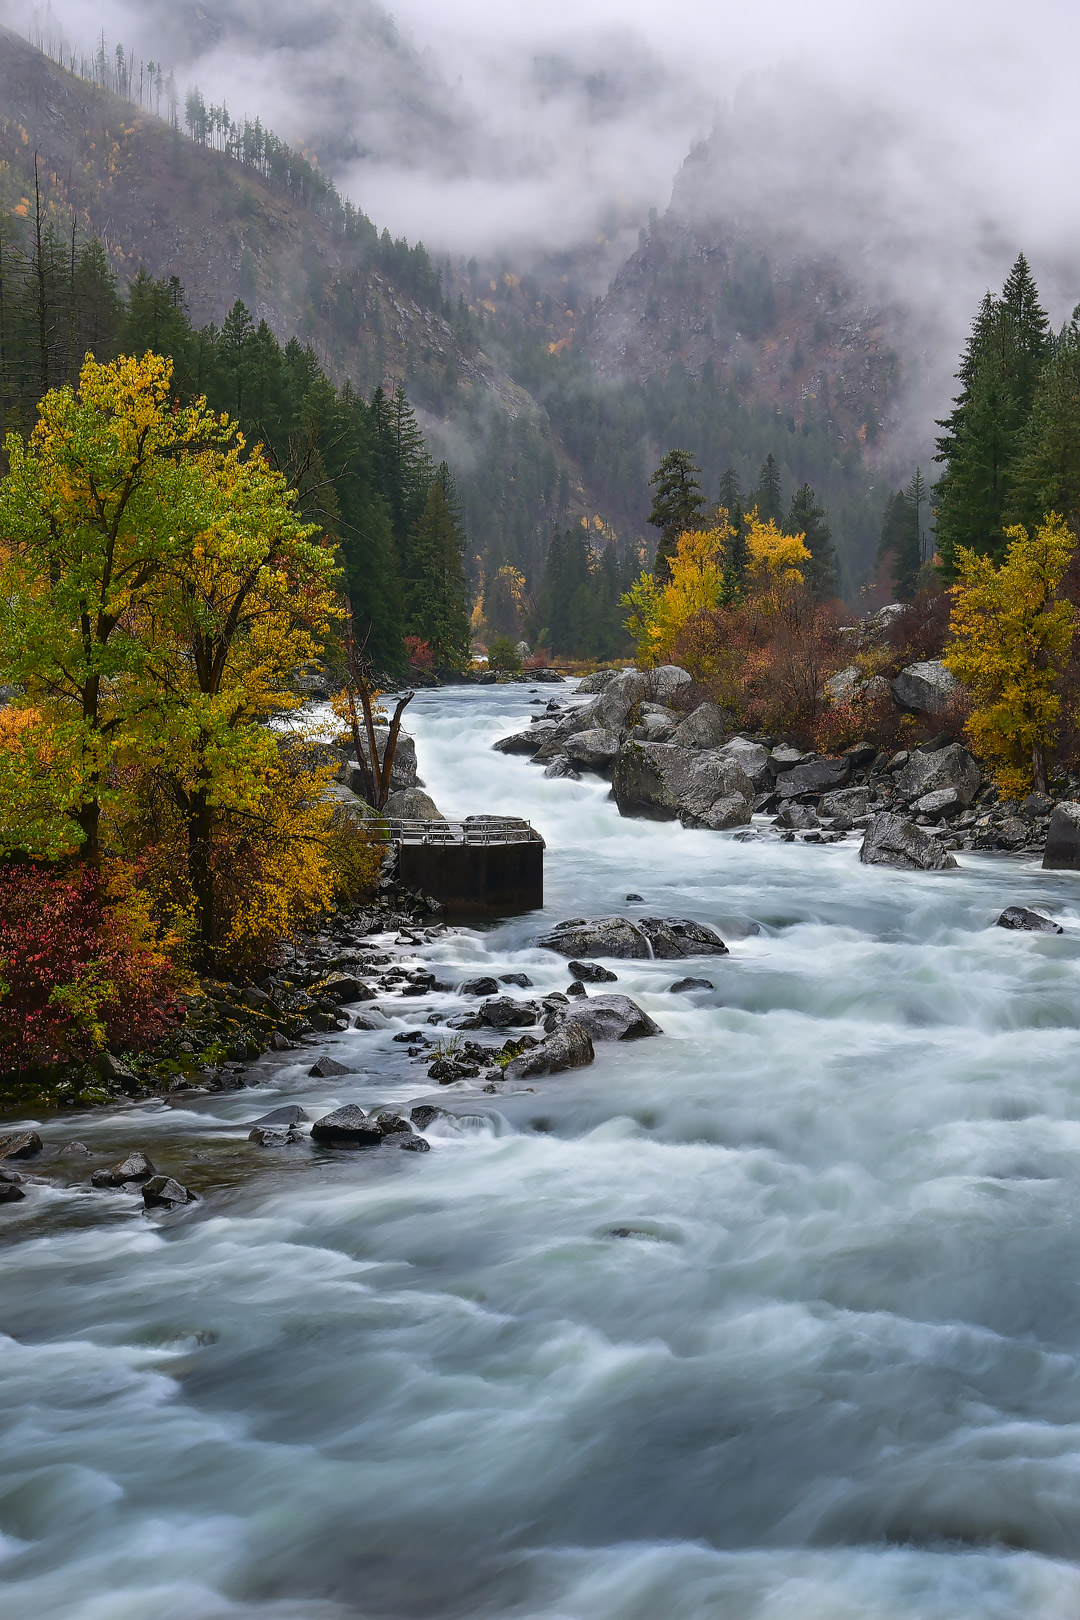 Fall in Washington State in Leavenworth + 17 Places for the Best Fall Foliage in USA // Local Adventurer #usa #travel #fall #foliage #autumn #leaves #trees #washington #wastate #leavenworth